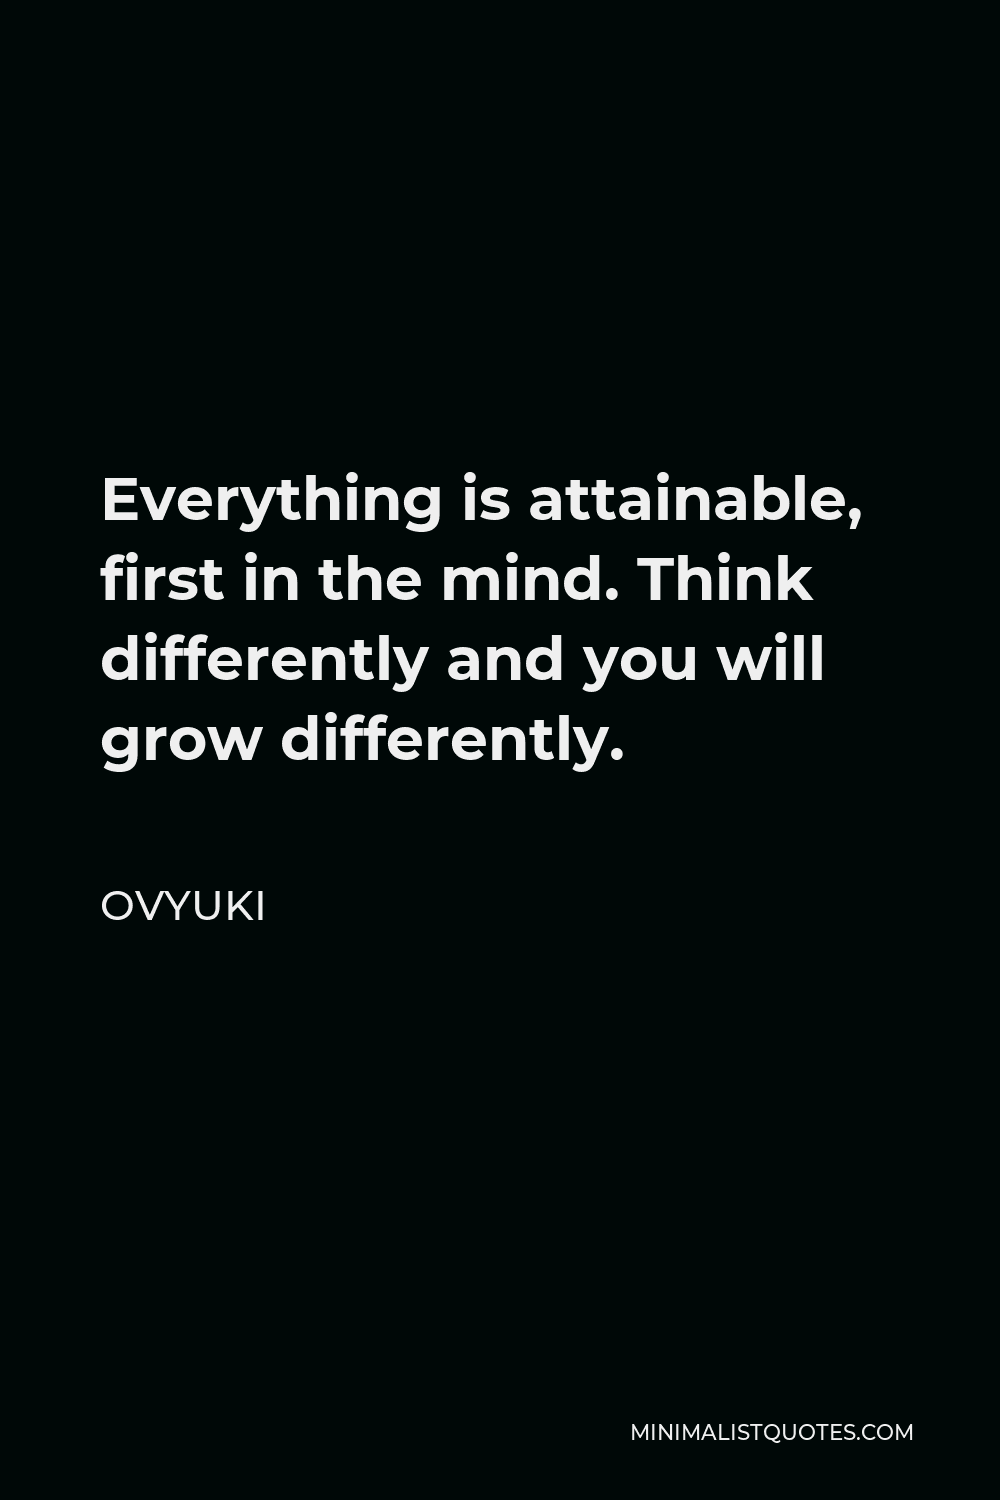 Ovyuki Quote - Everything is attainable, first in the mind. Think differently and you will grow differently.